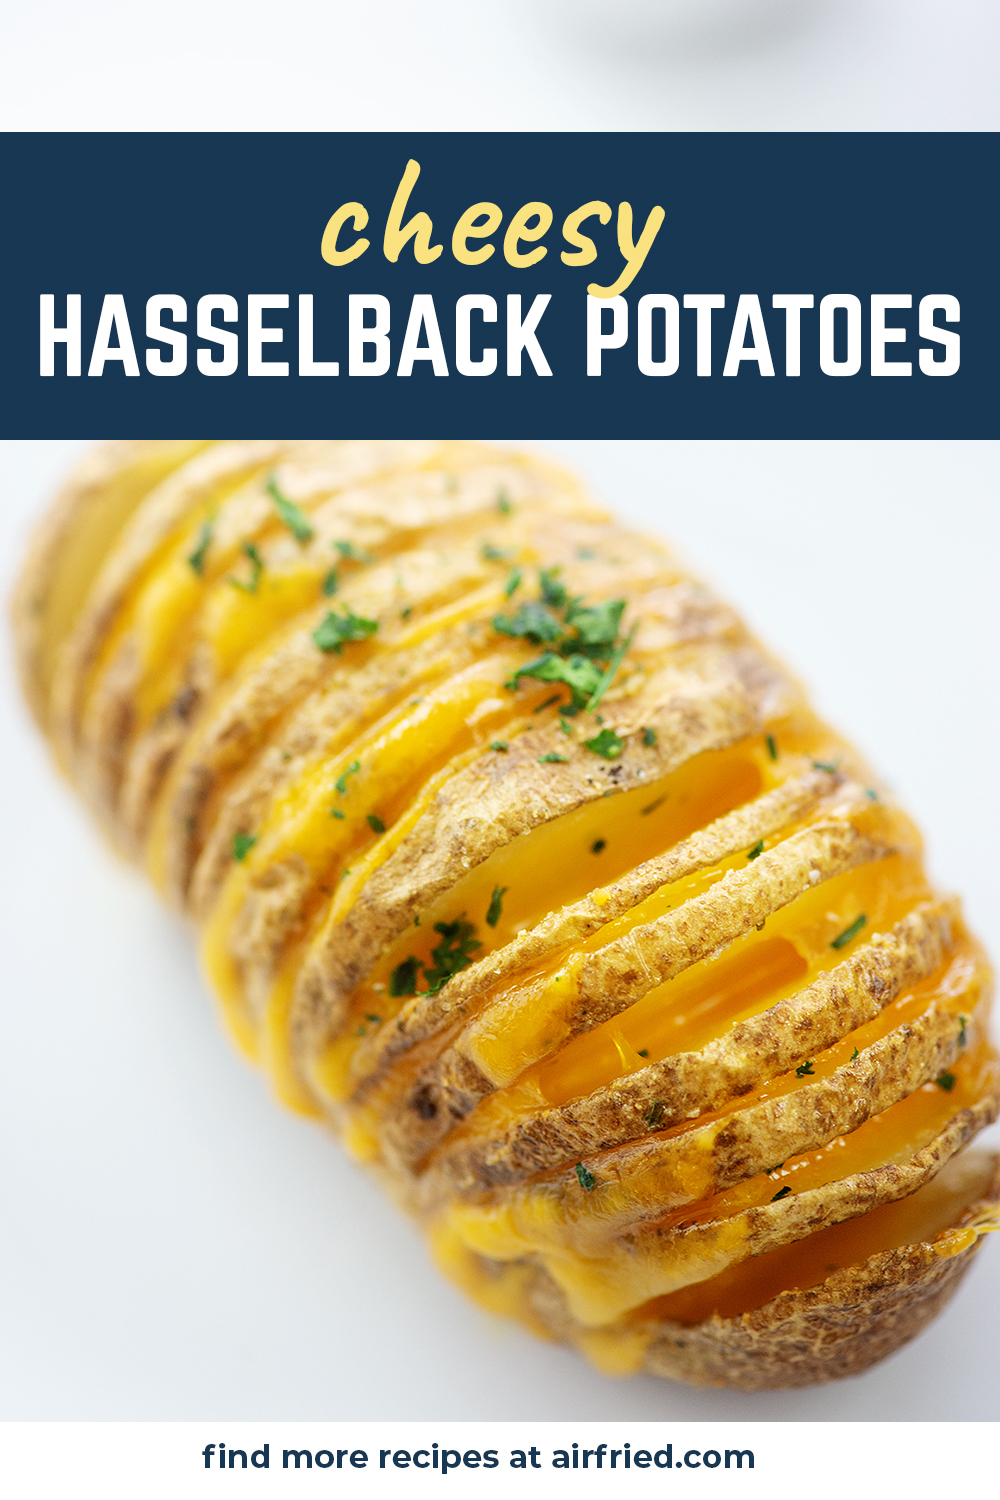 Cheesy Hasselback Potatoes made in the air fryer are a tasty way to get dinner on the table!